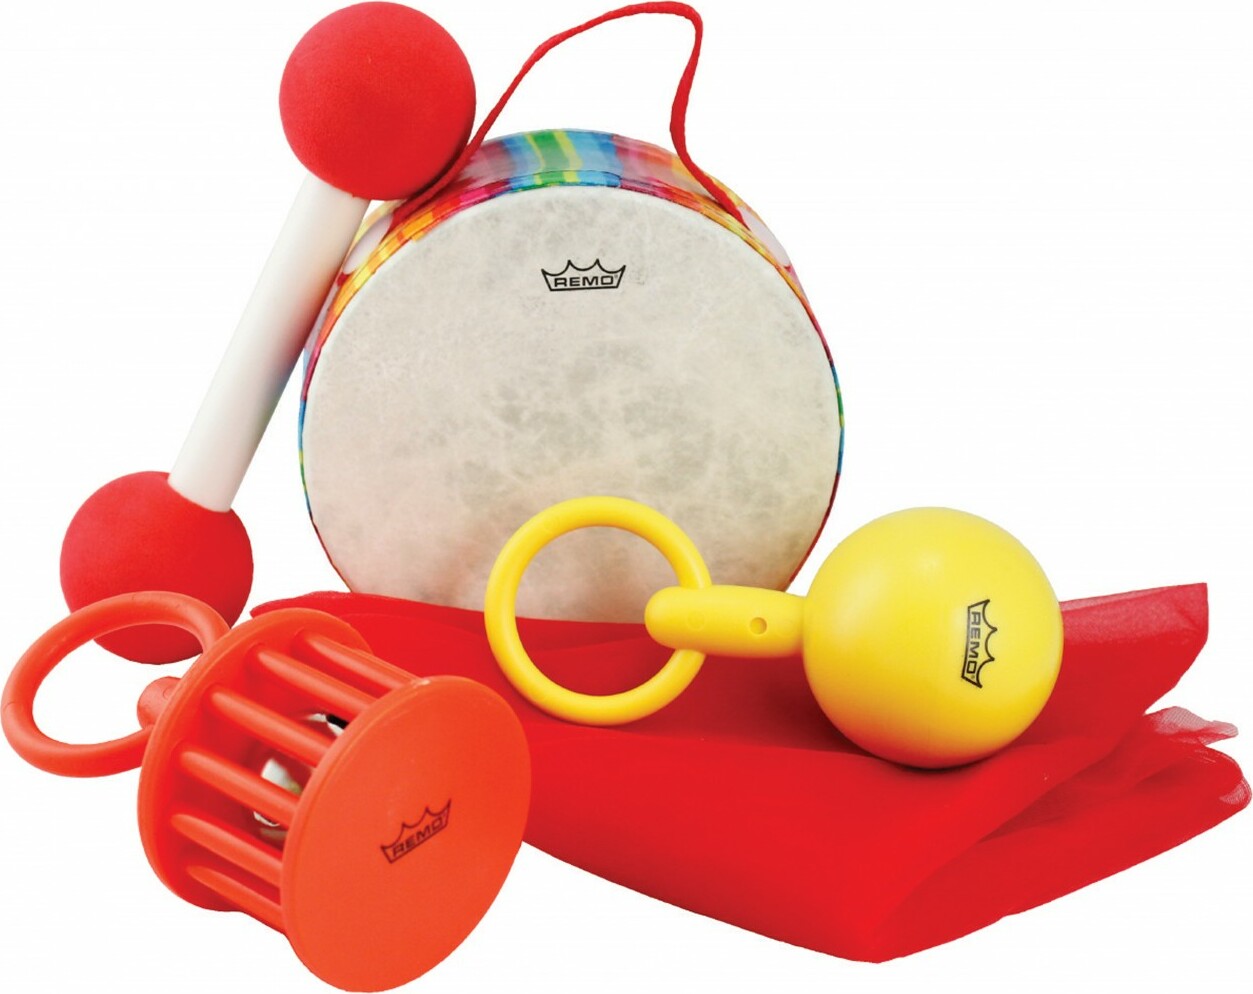 Remo Babies Make Music Kit Percussions - Perkussion Set für Kinder - Main picture